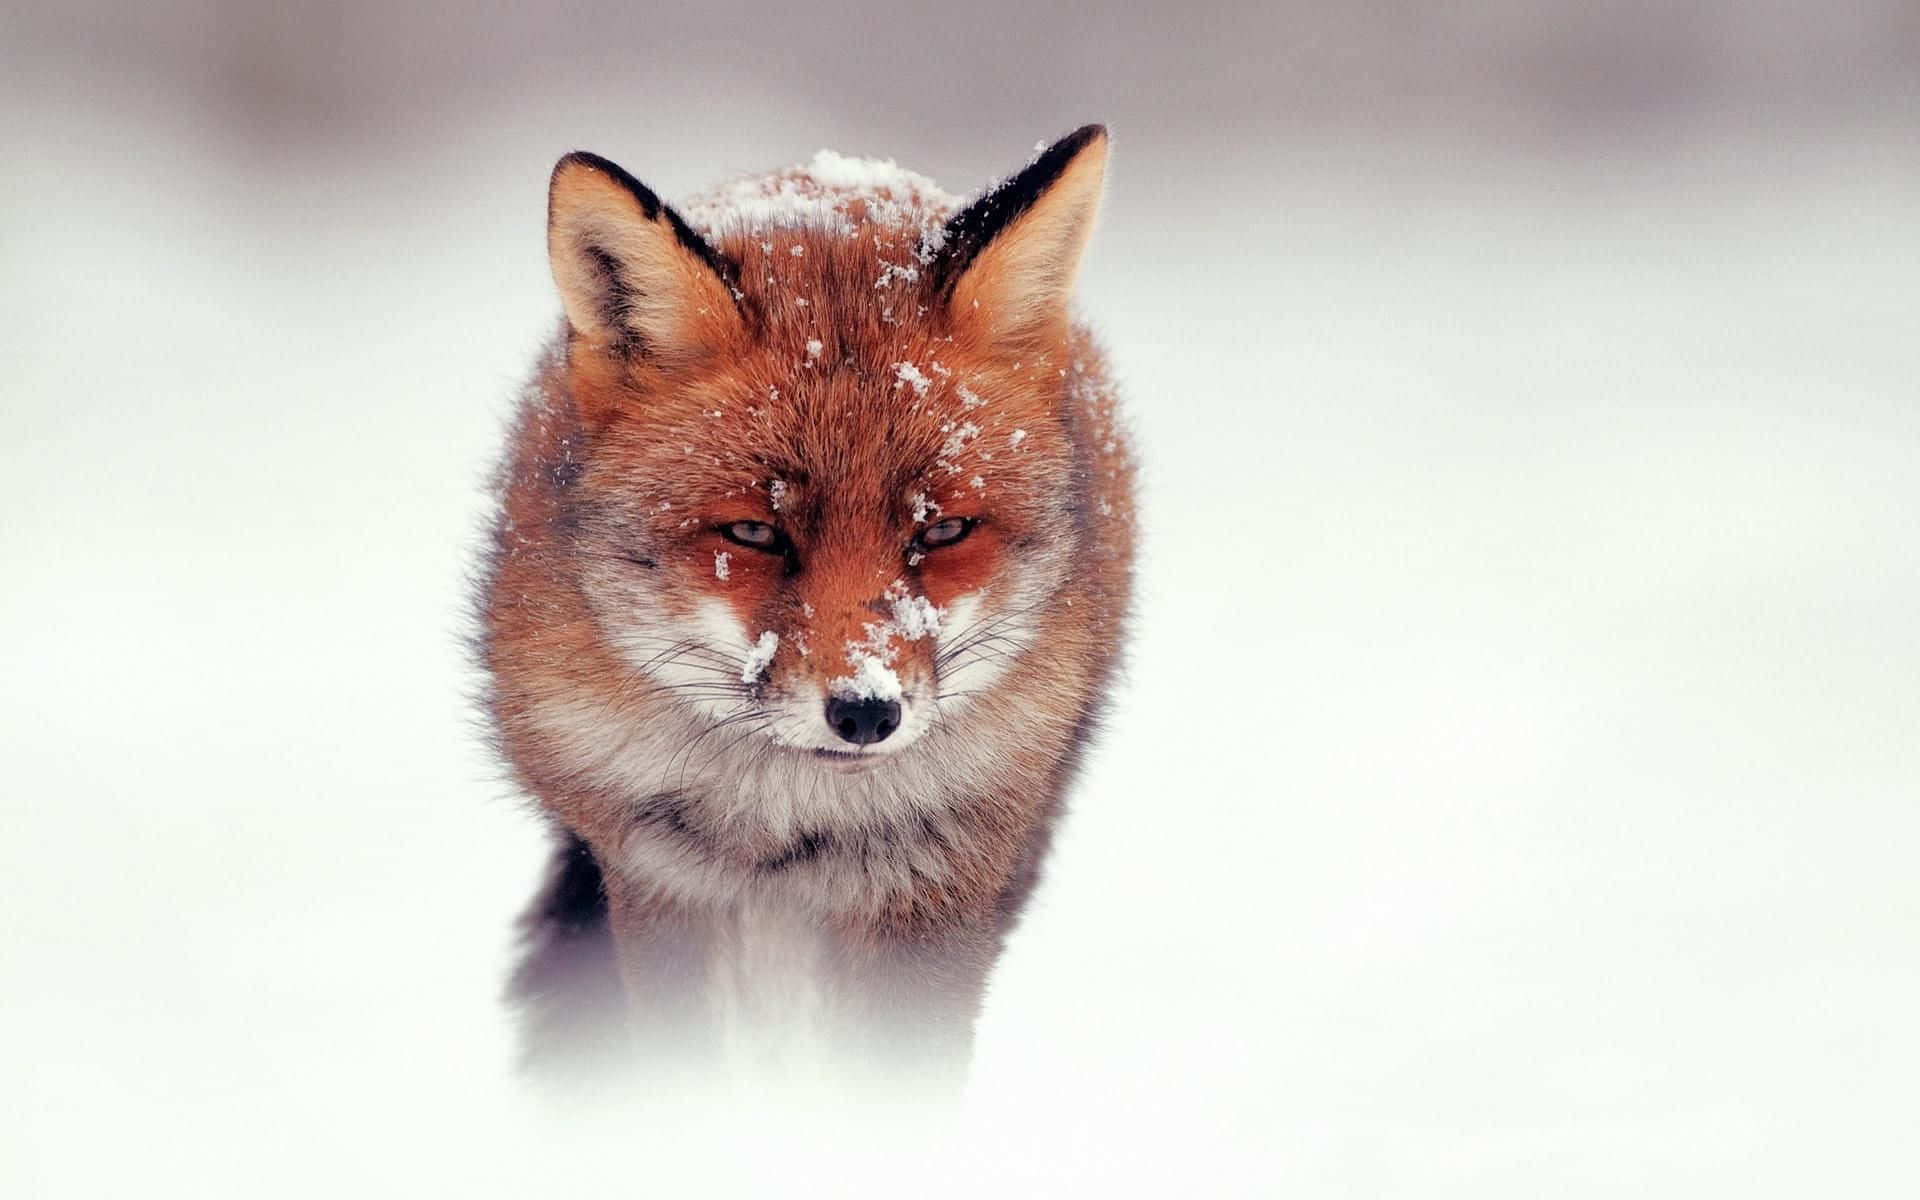 A sweet and adorable fox